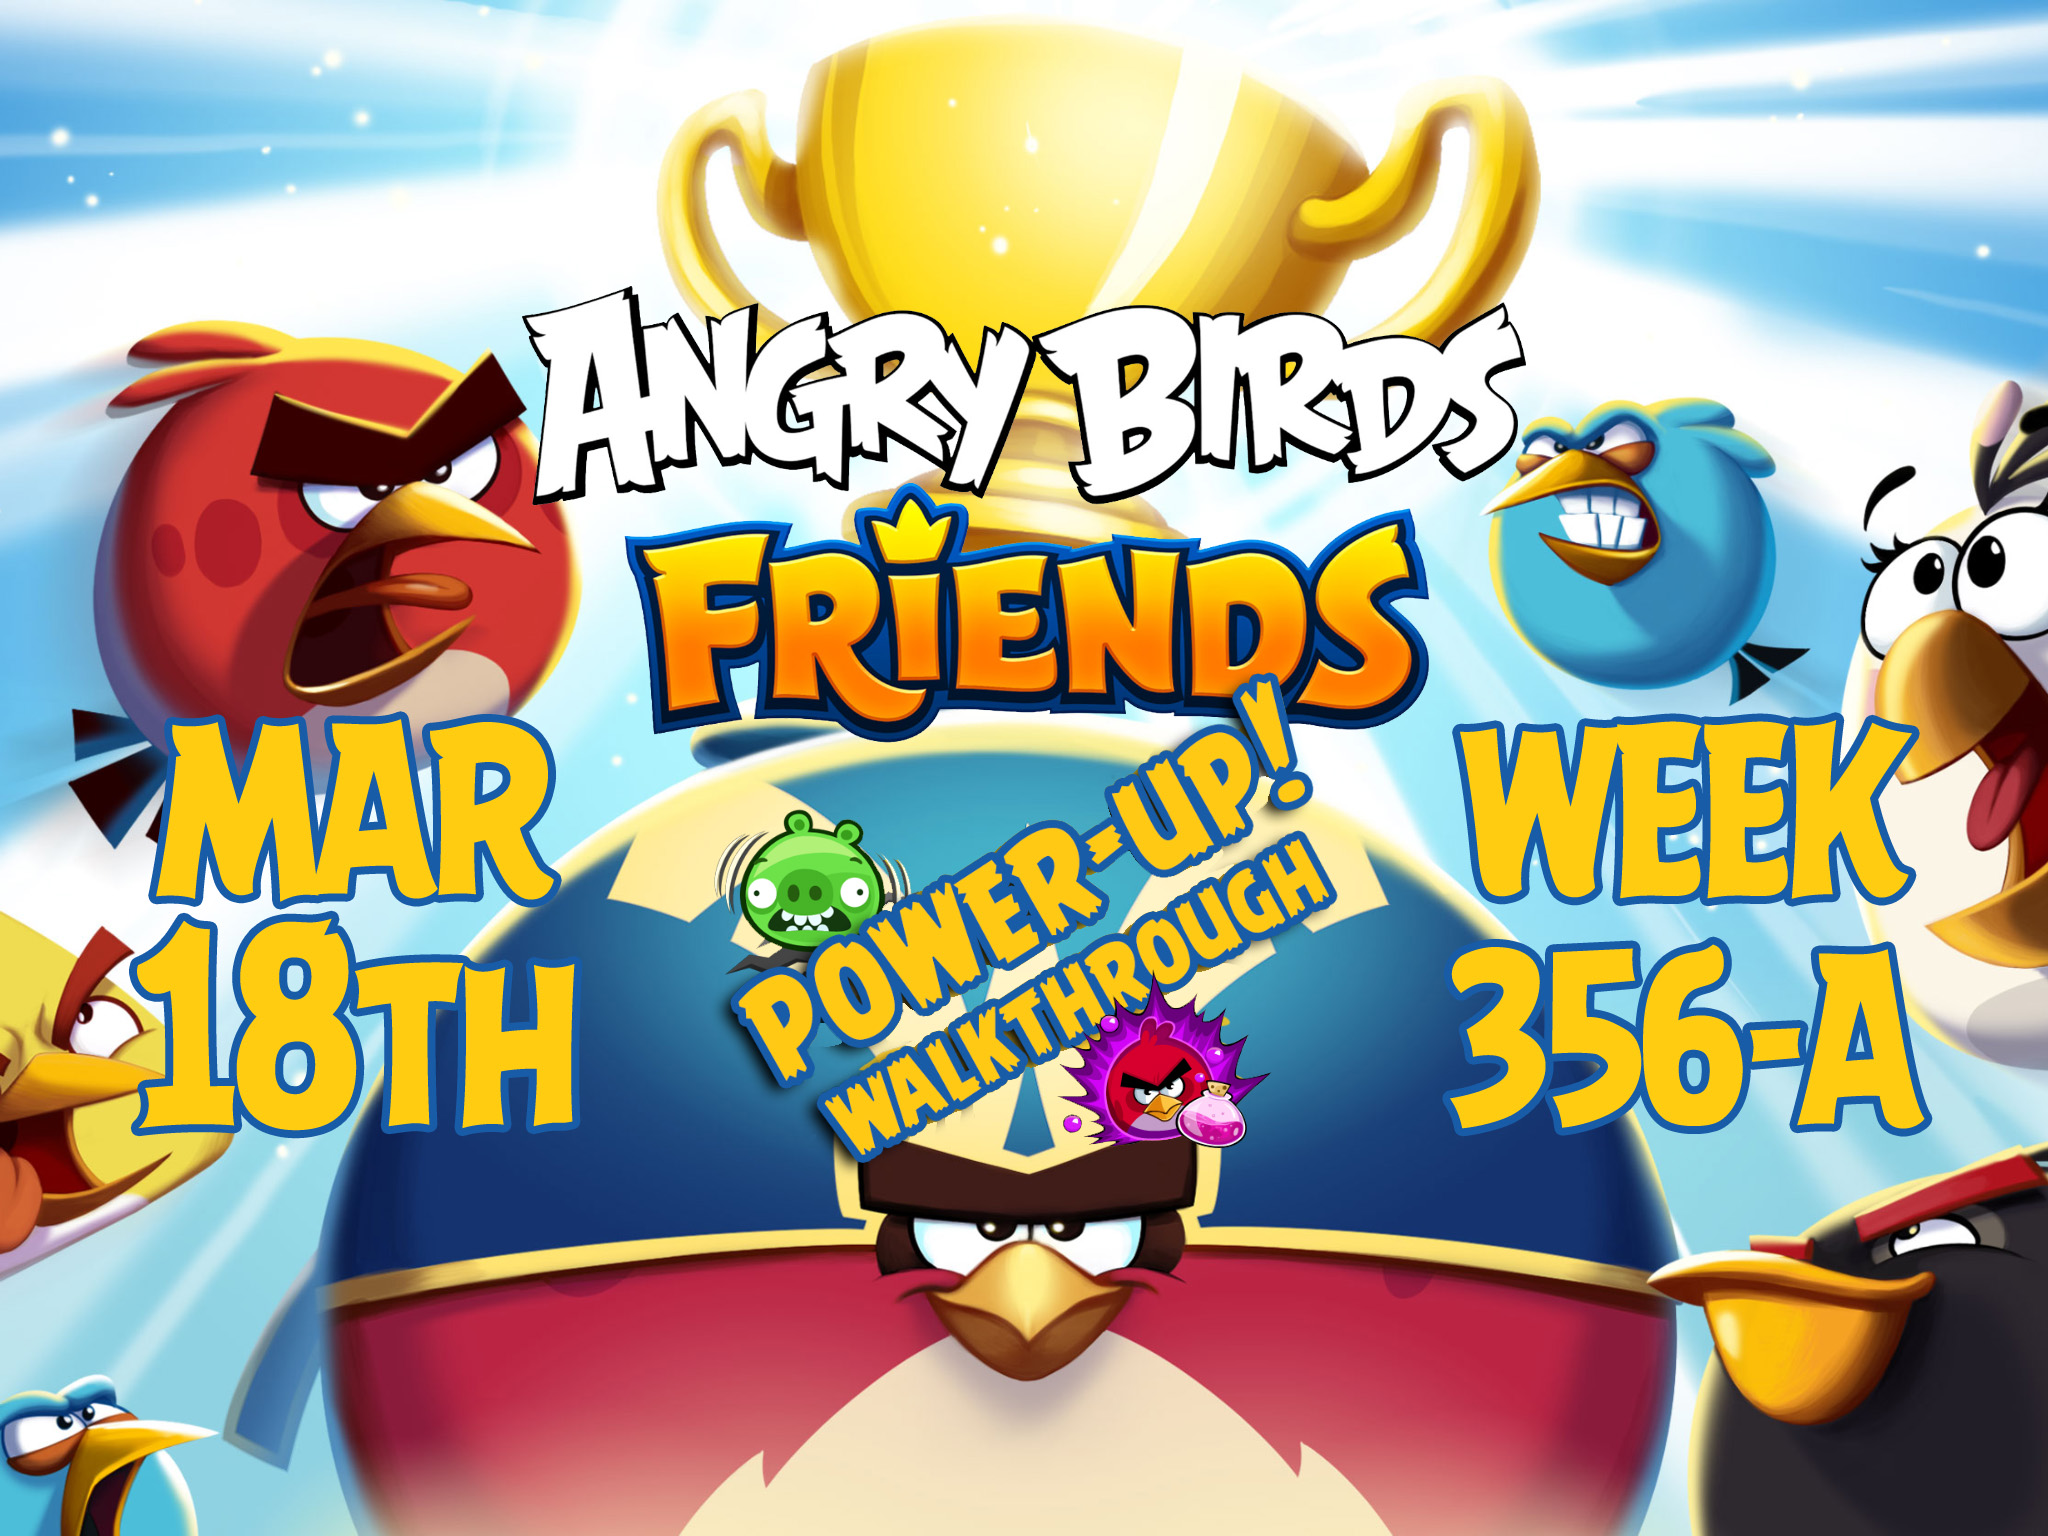 Angry-Birds-Friends-Tournament-Week-356-A-Feature-Image-PU